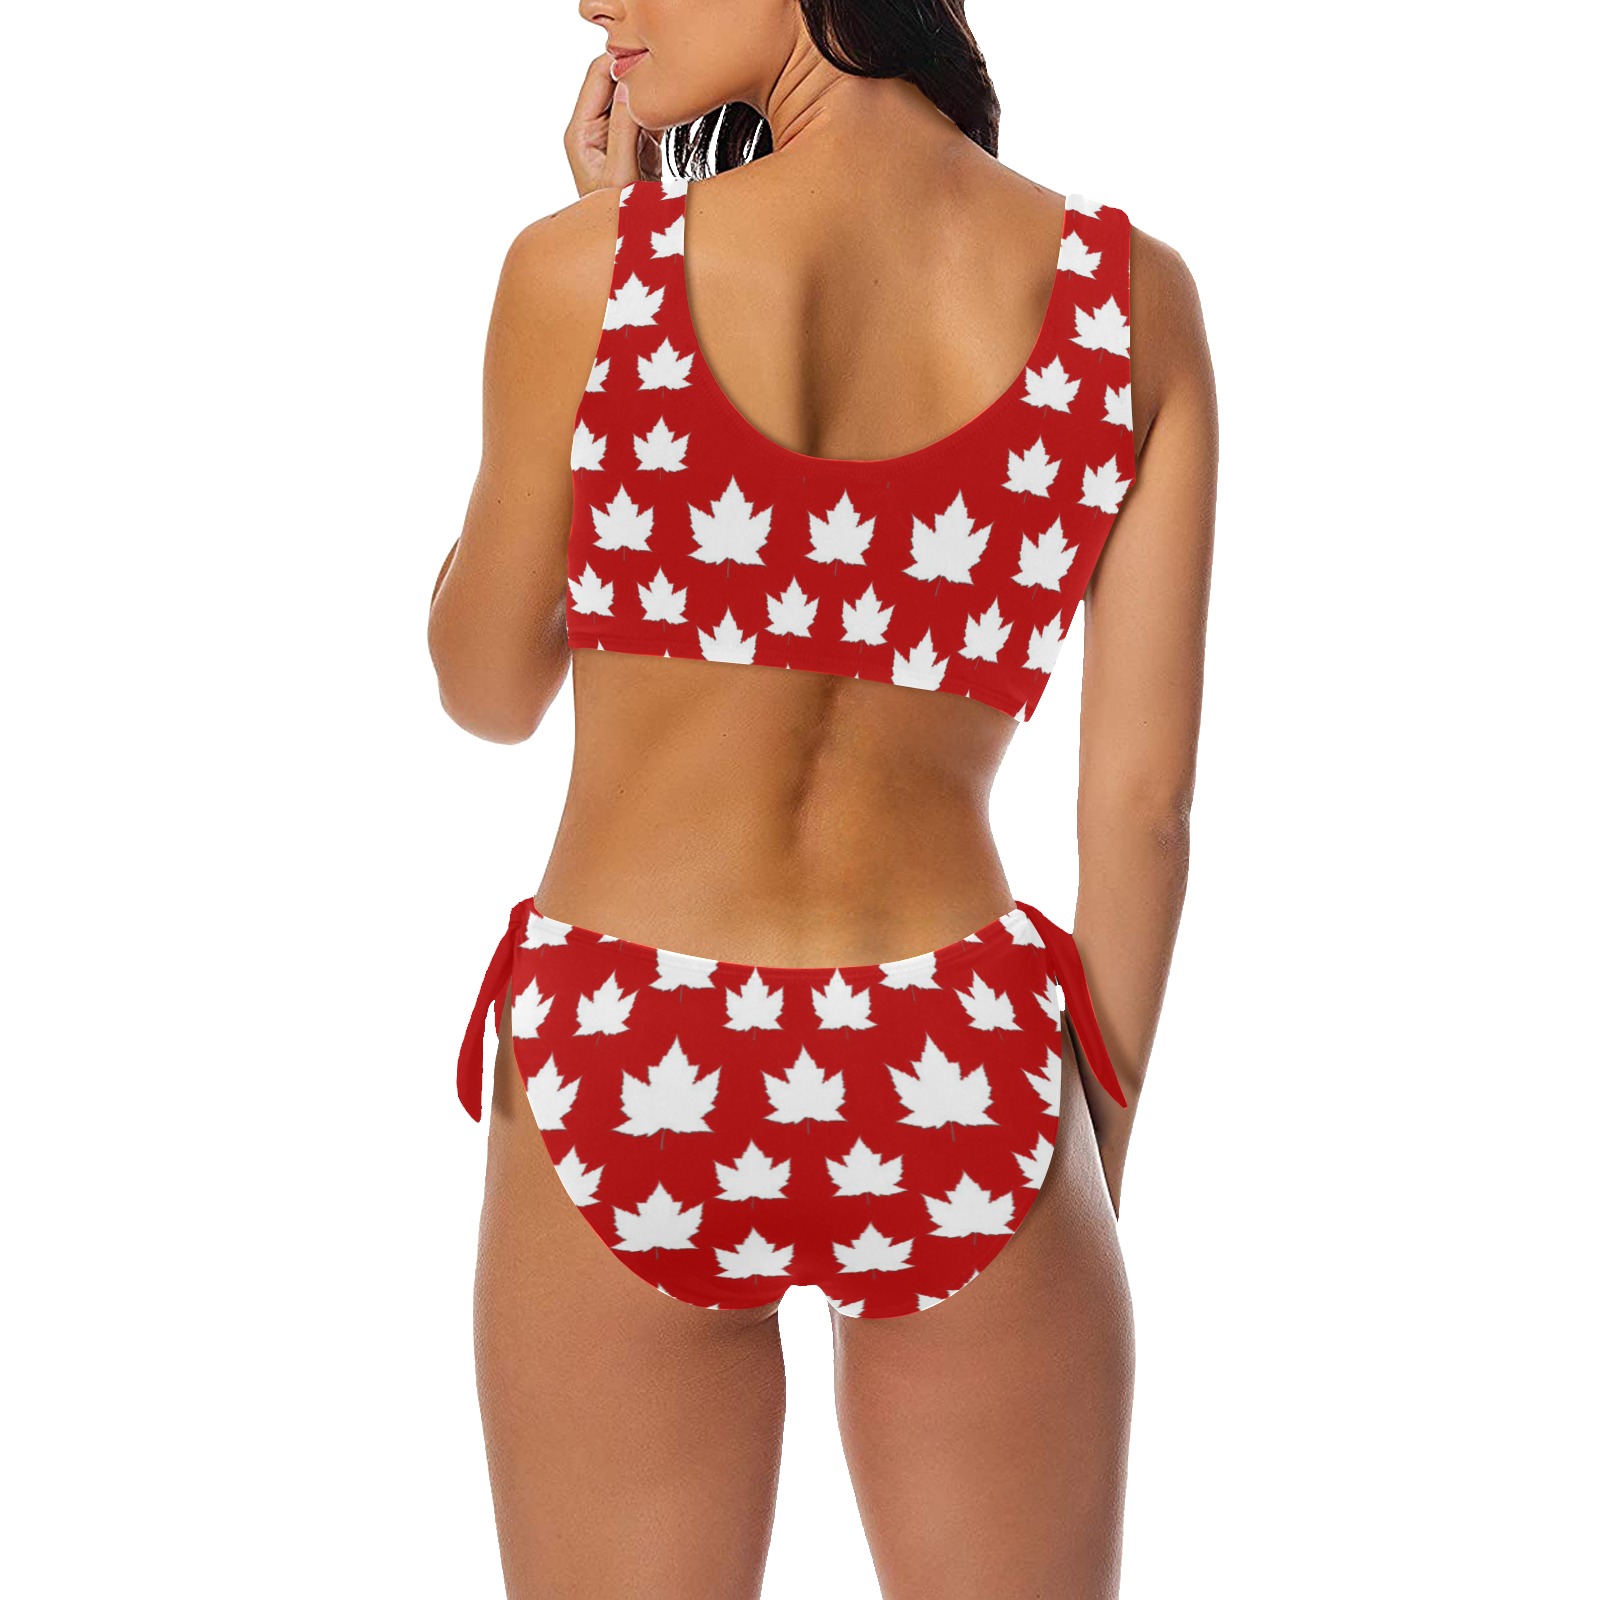 Cute Two Piece Canada Bathing Suits Bow Tie Front Bikini Swimsuit (Model S38)